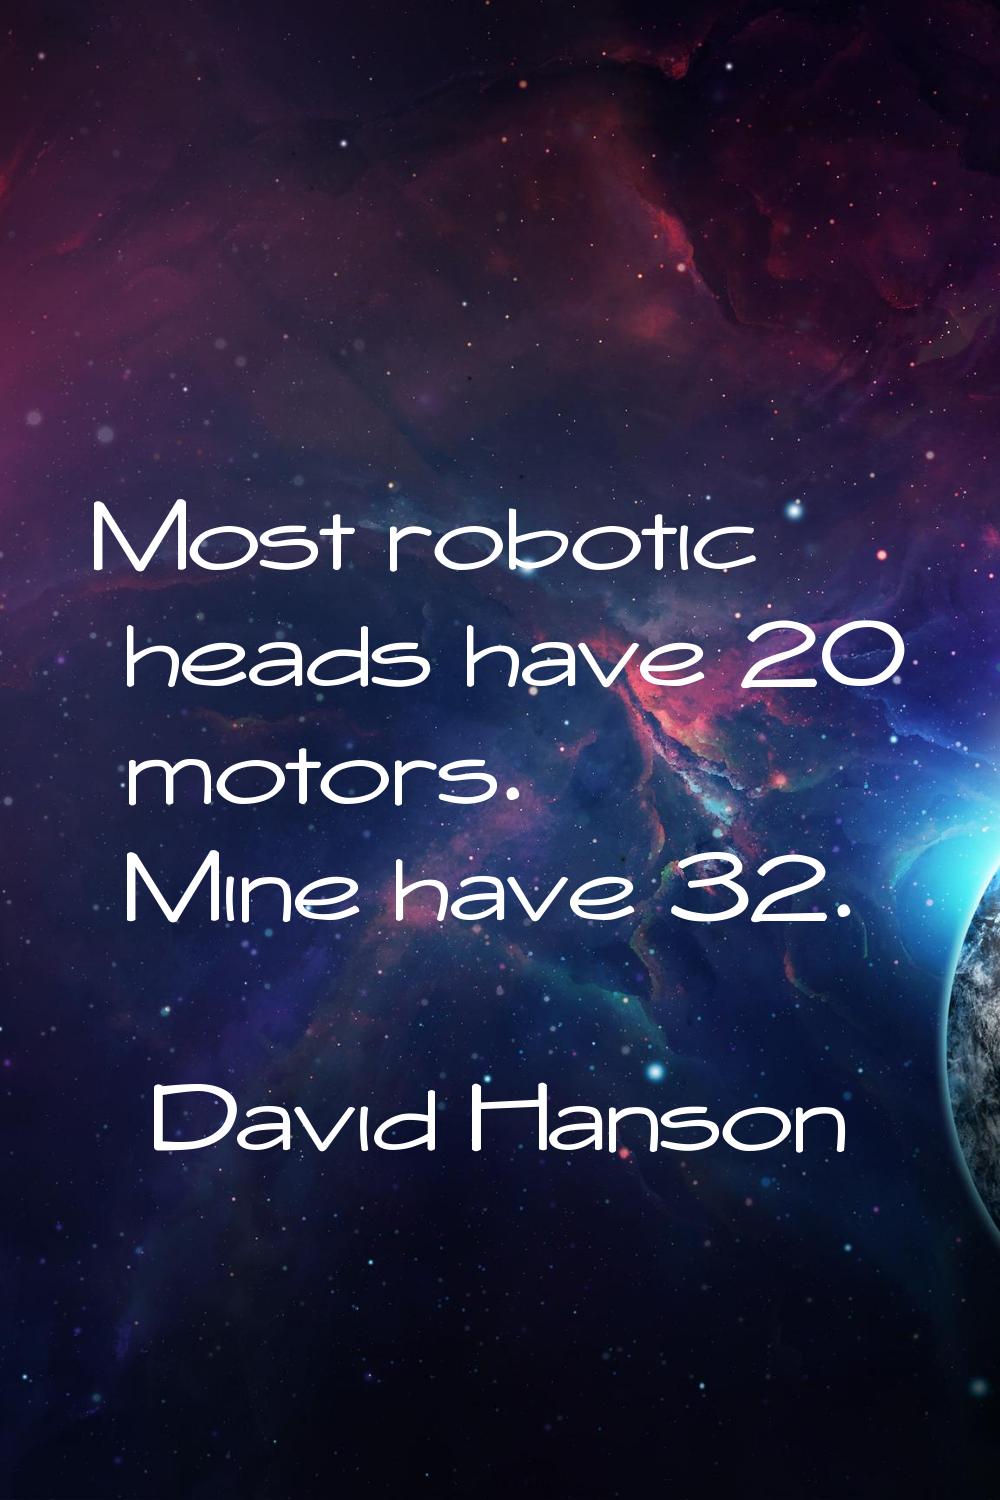 Most robotic heads have 20 motors. Mine have 32.